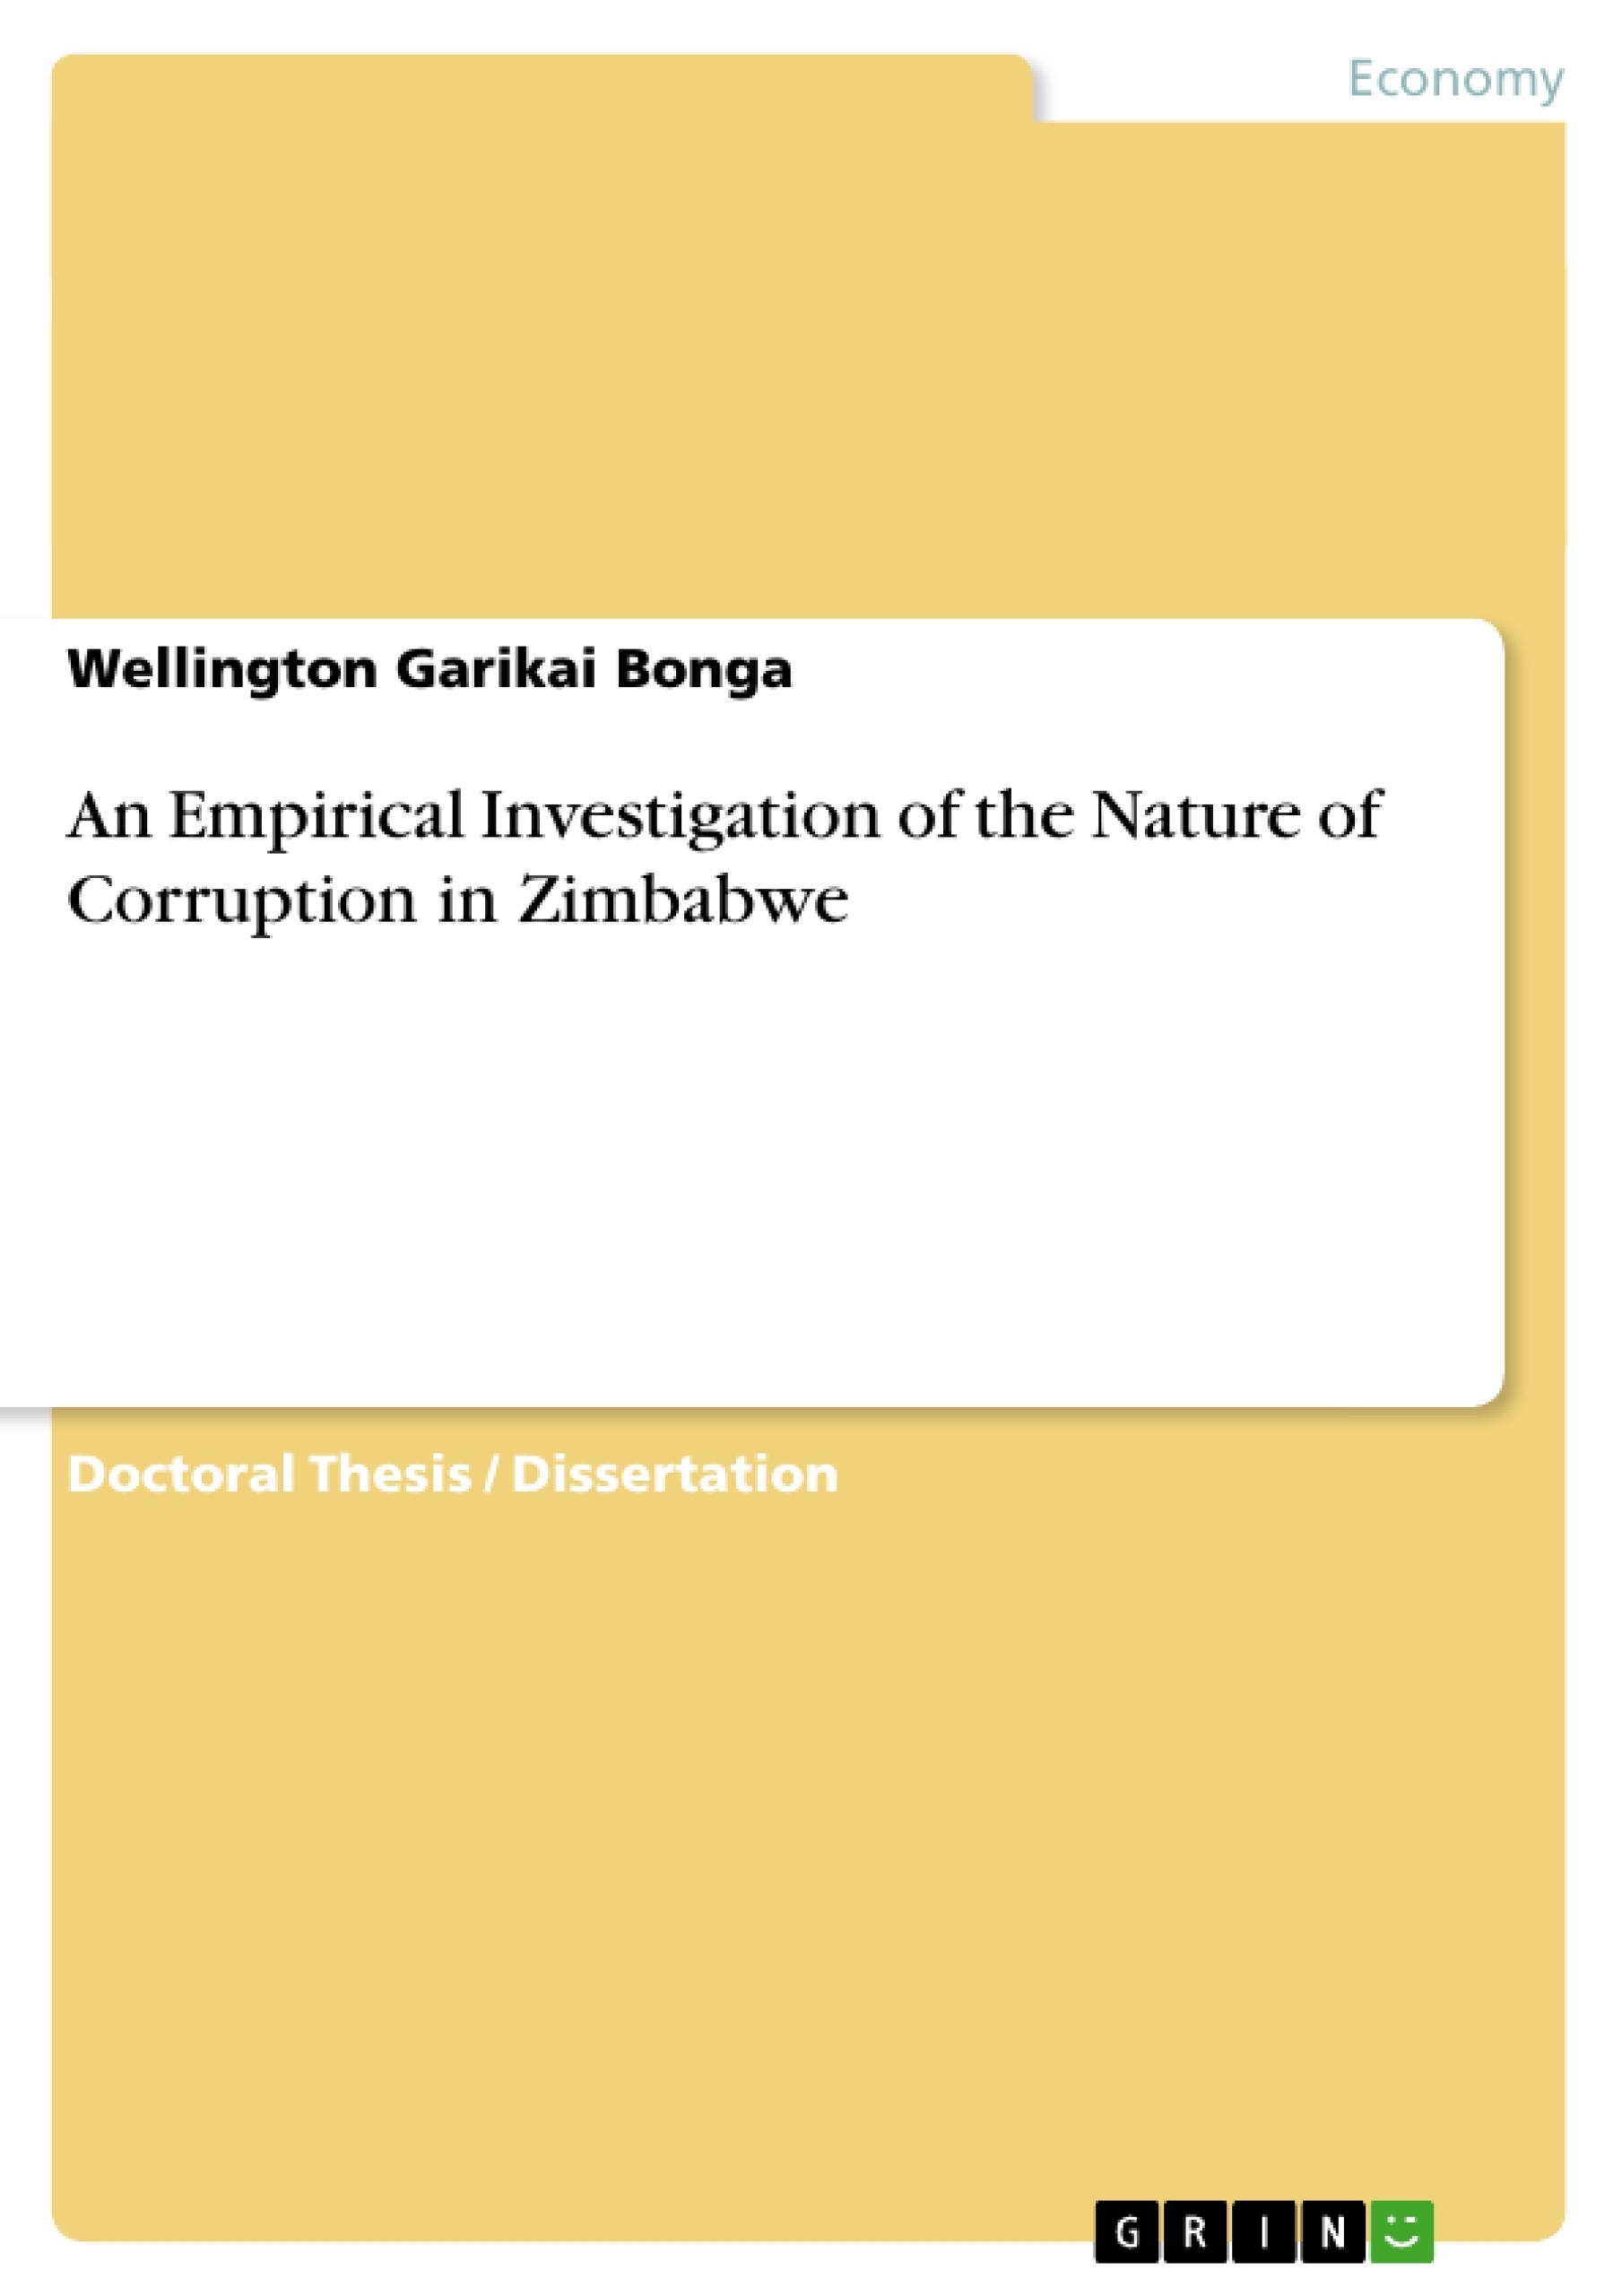 Titre: An Empirical Investigation of the Nature of Corruption in Zimbabwe